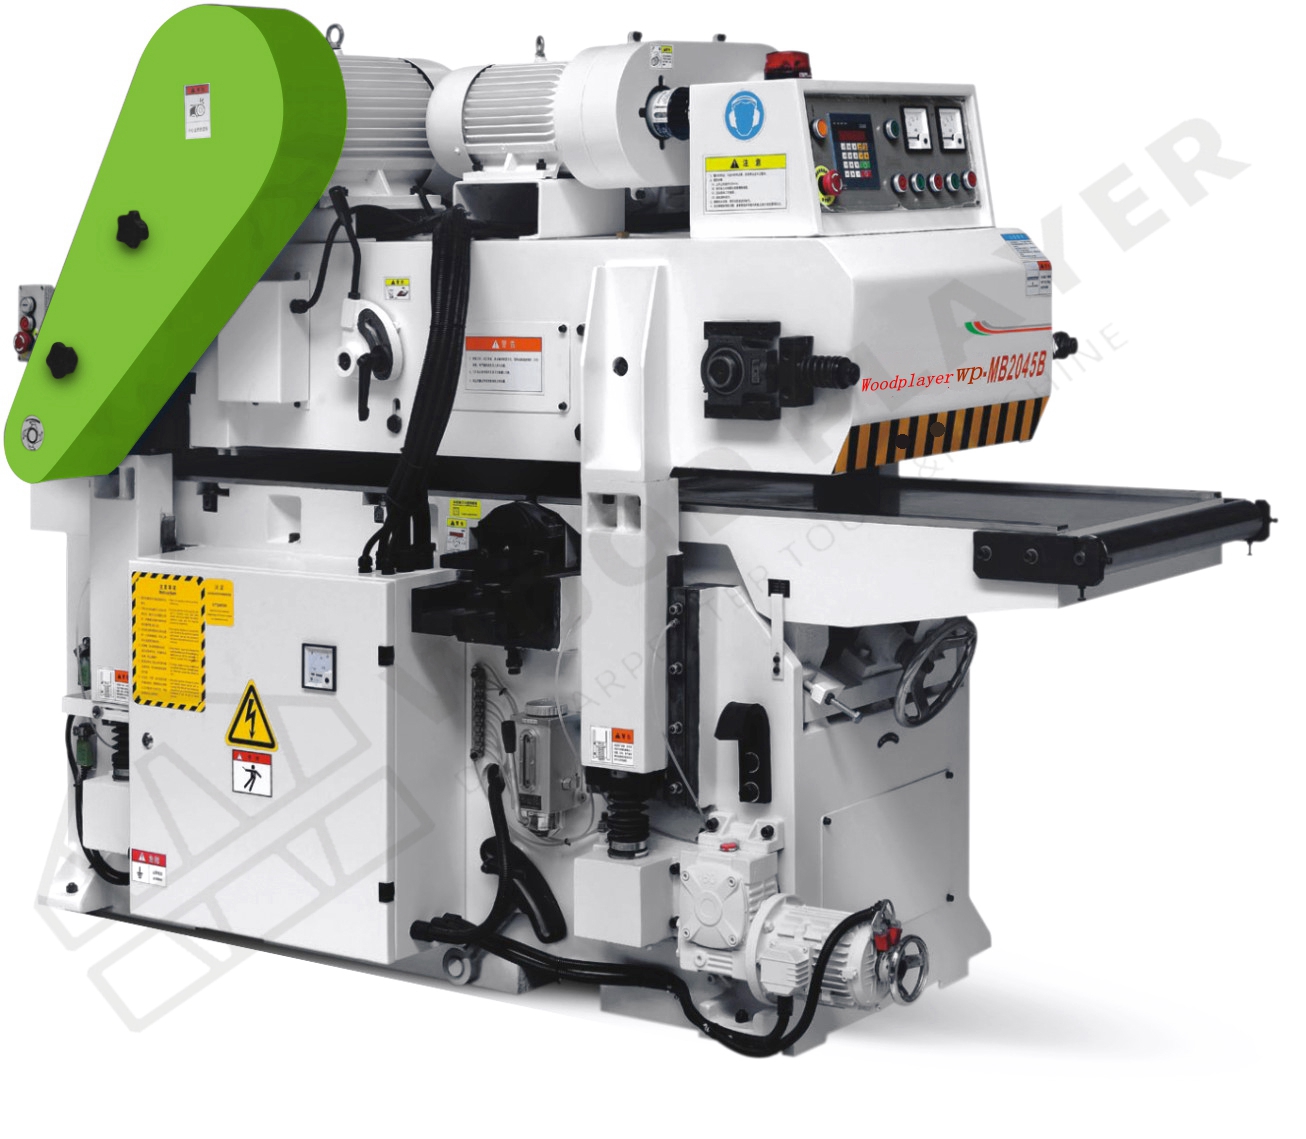 WP-MB2045B Double-Sided Planer Efficient Energy-Saving Press Planer Woodworking Machinery Equipment Heavy High-Speed Double-Shaft Planer